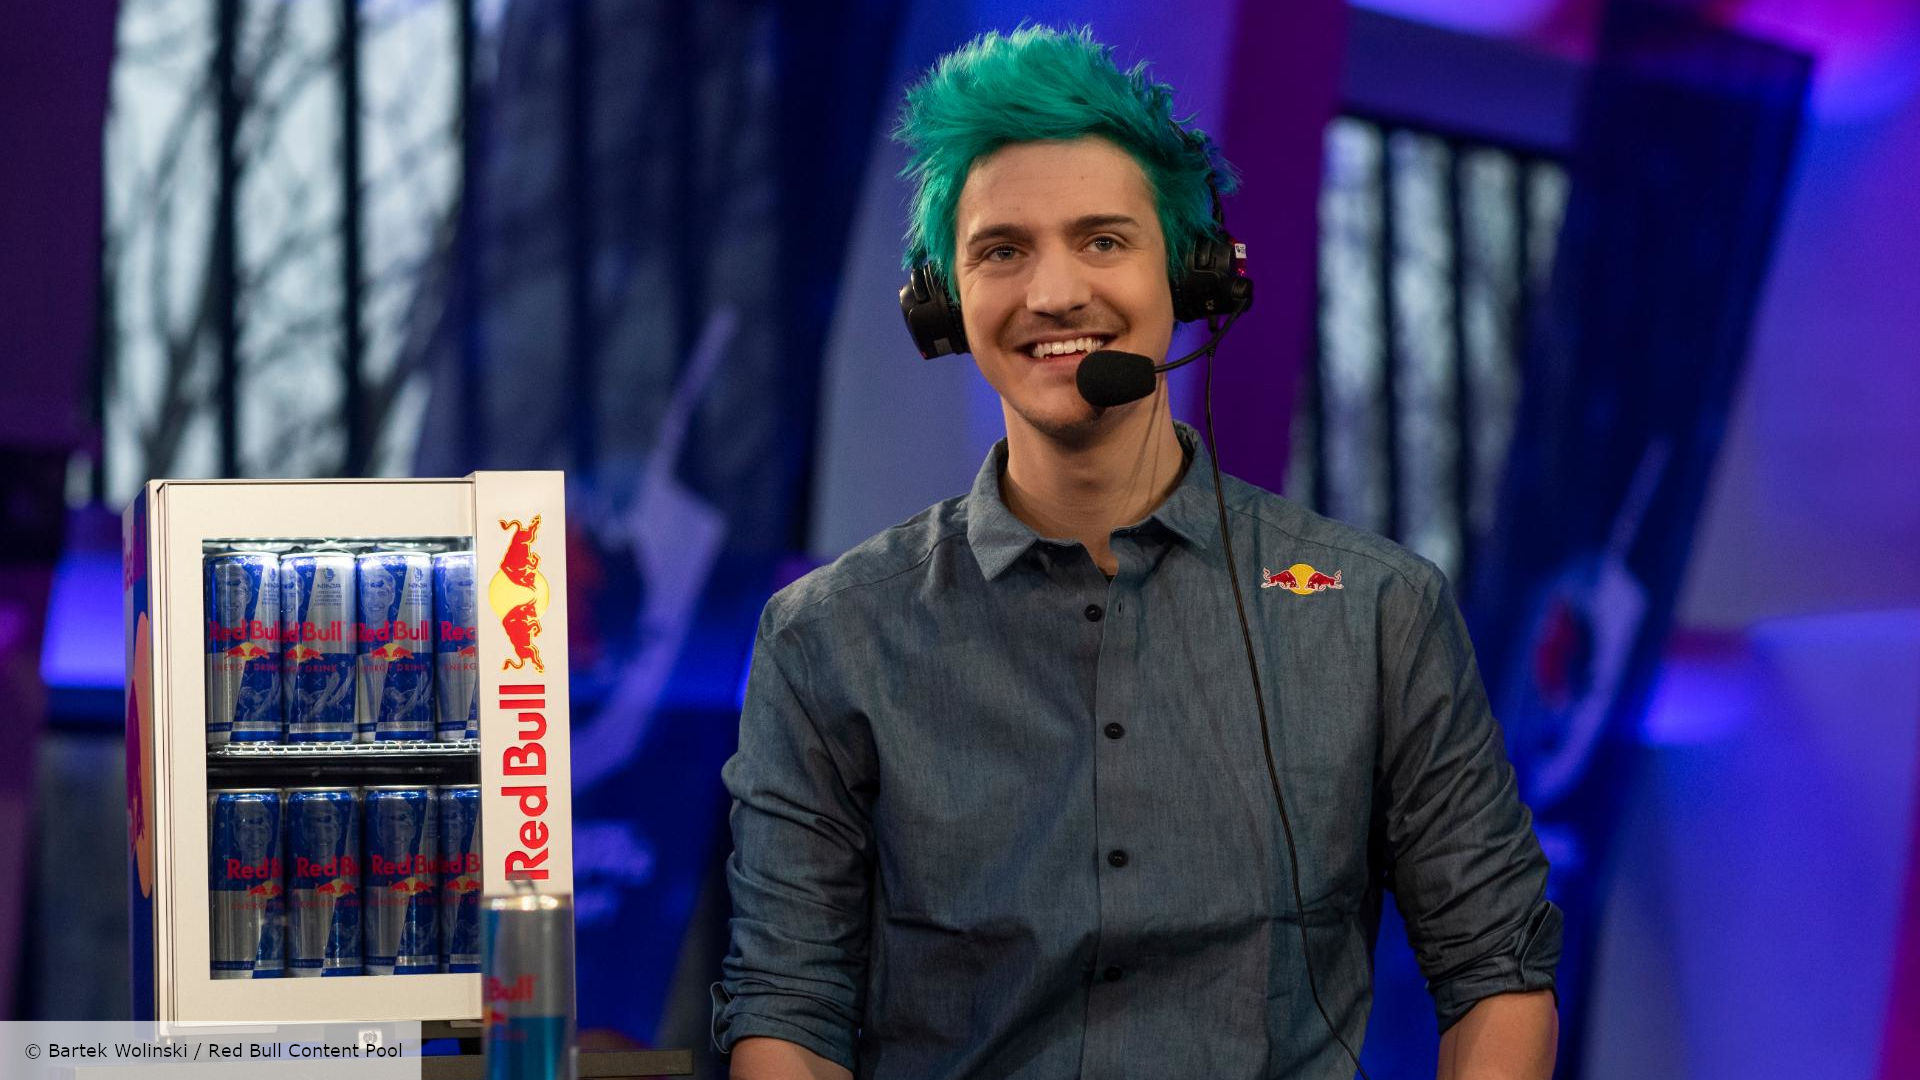 Who is Ninja? Net worth, earnings, streaming setup, and more The Loadout